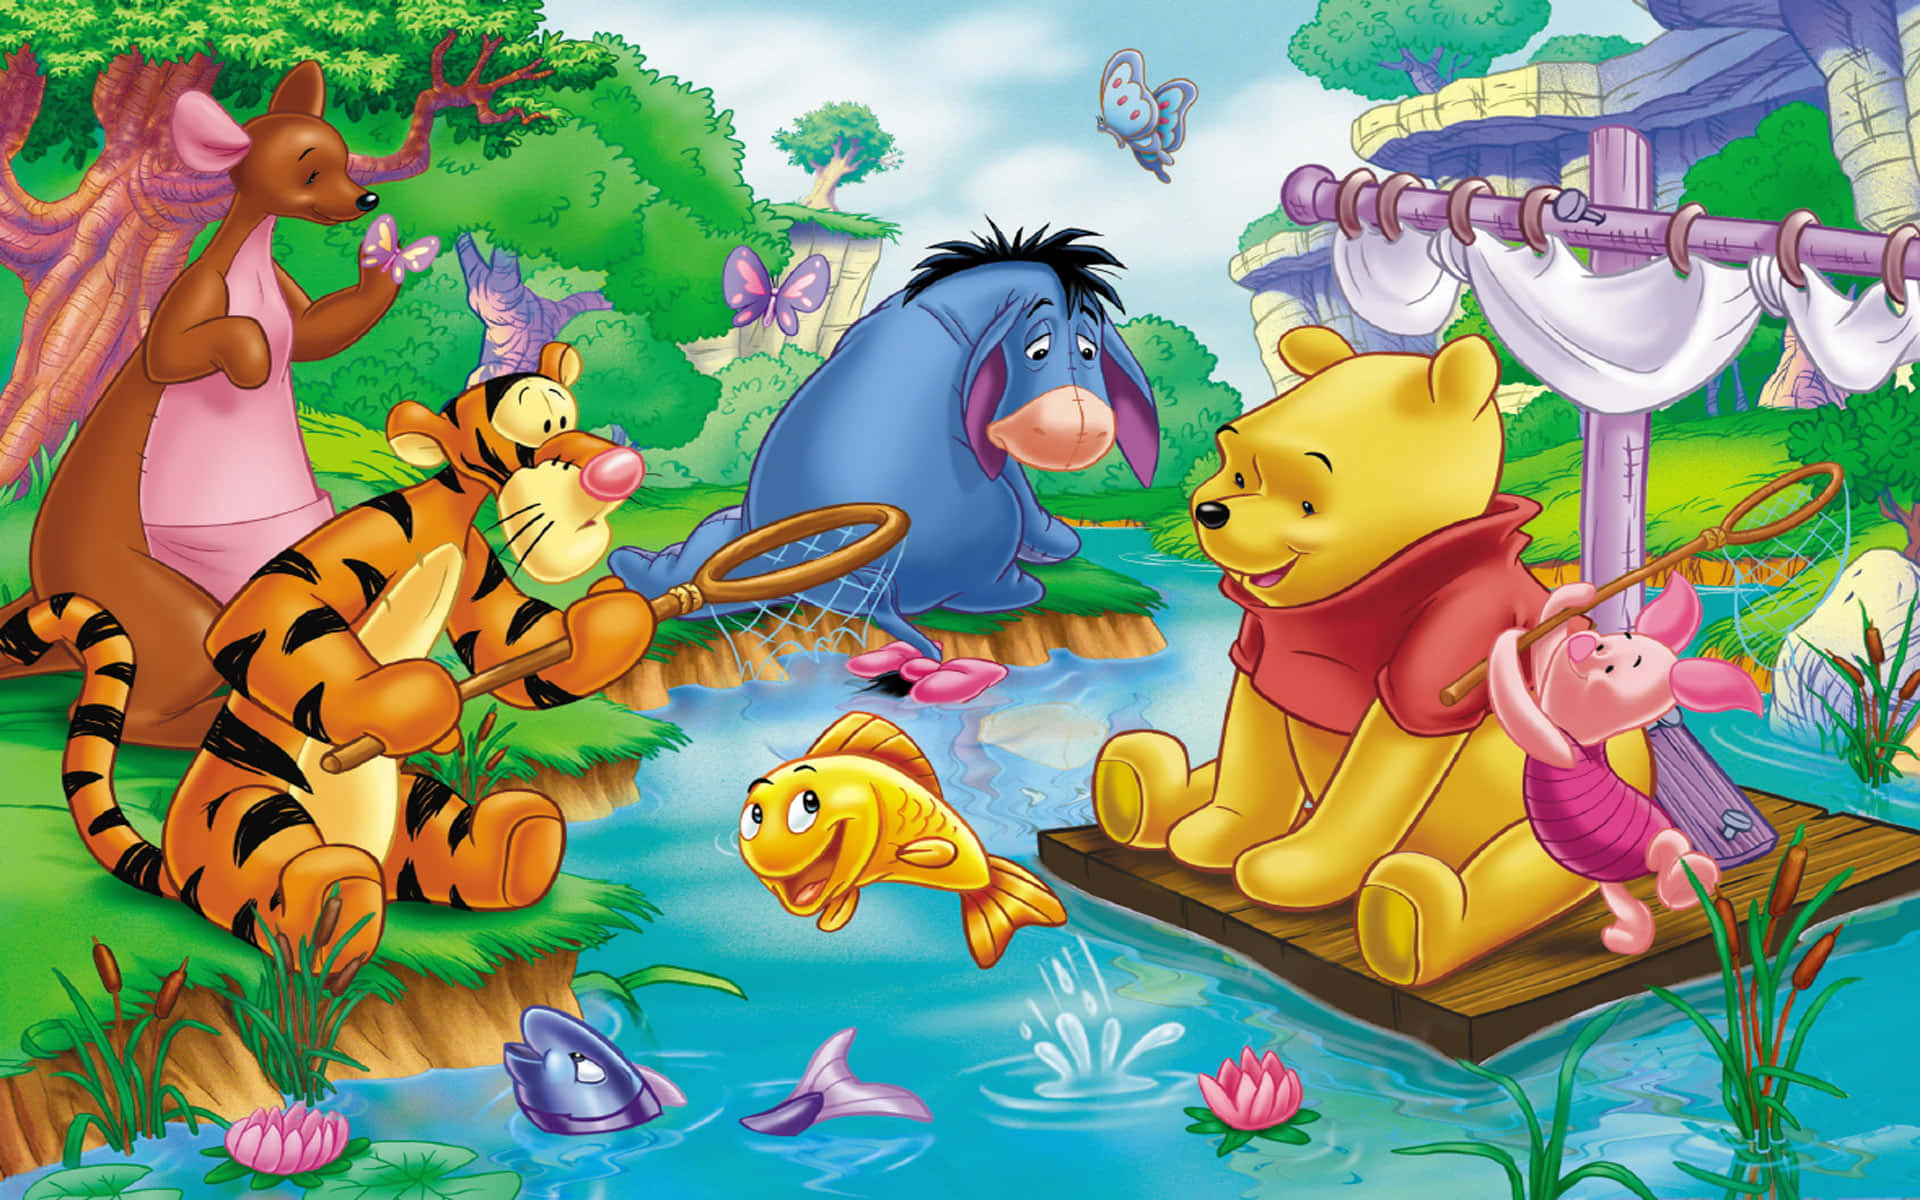 Enjoy Sweet Moments With Winnie The Pooh On Your Desktop!